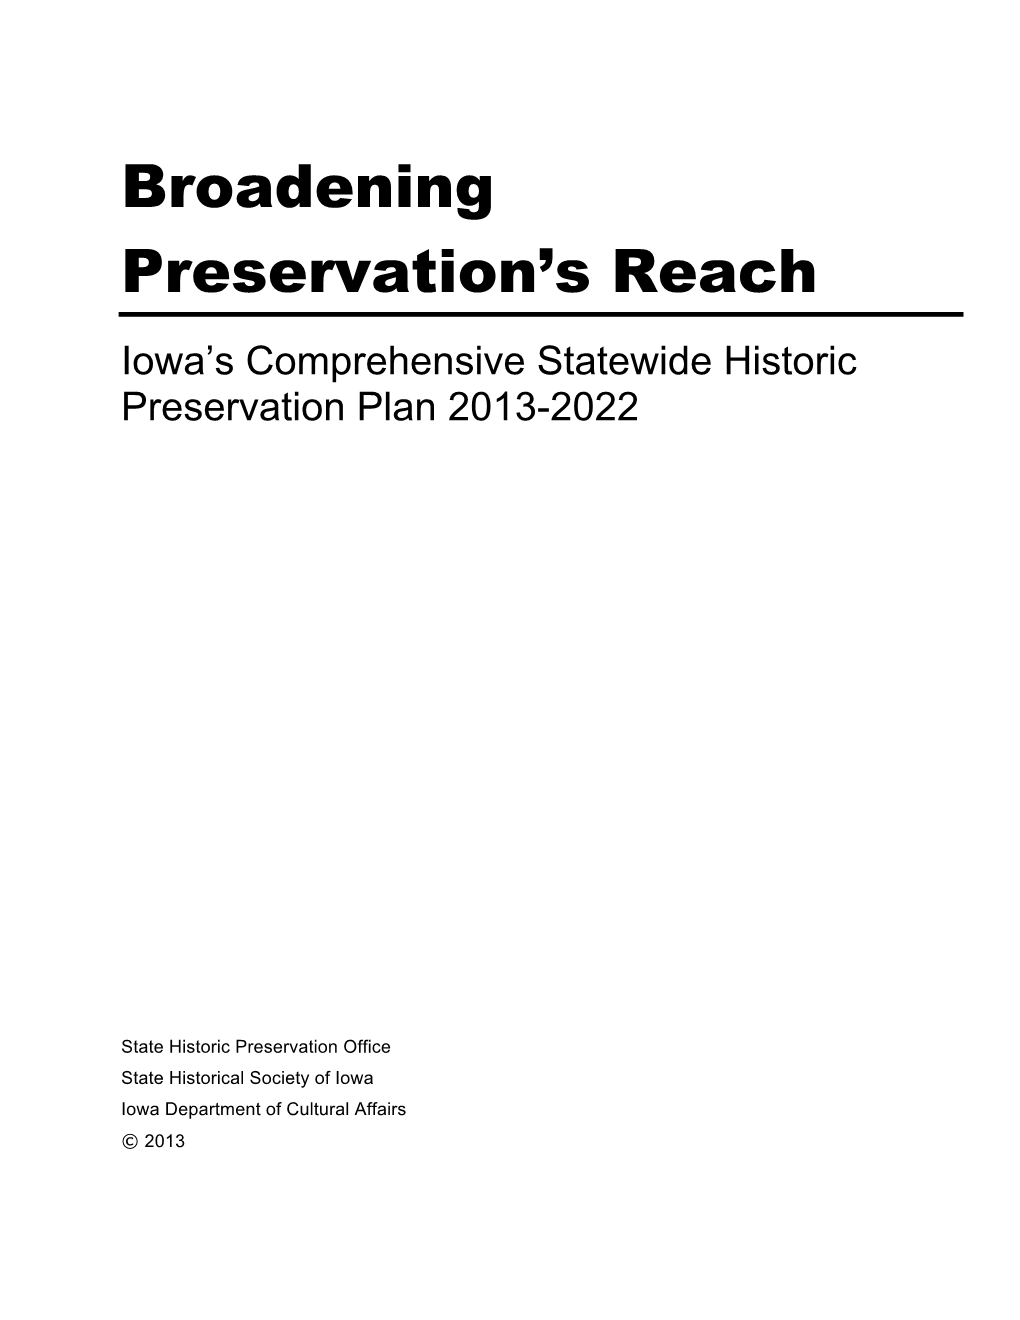 Statewide Historic Preservation Plan for 2013-2022